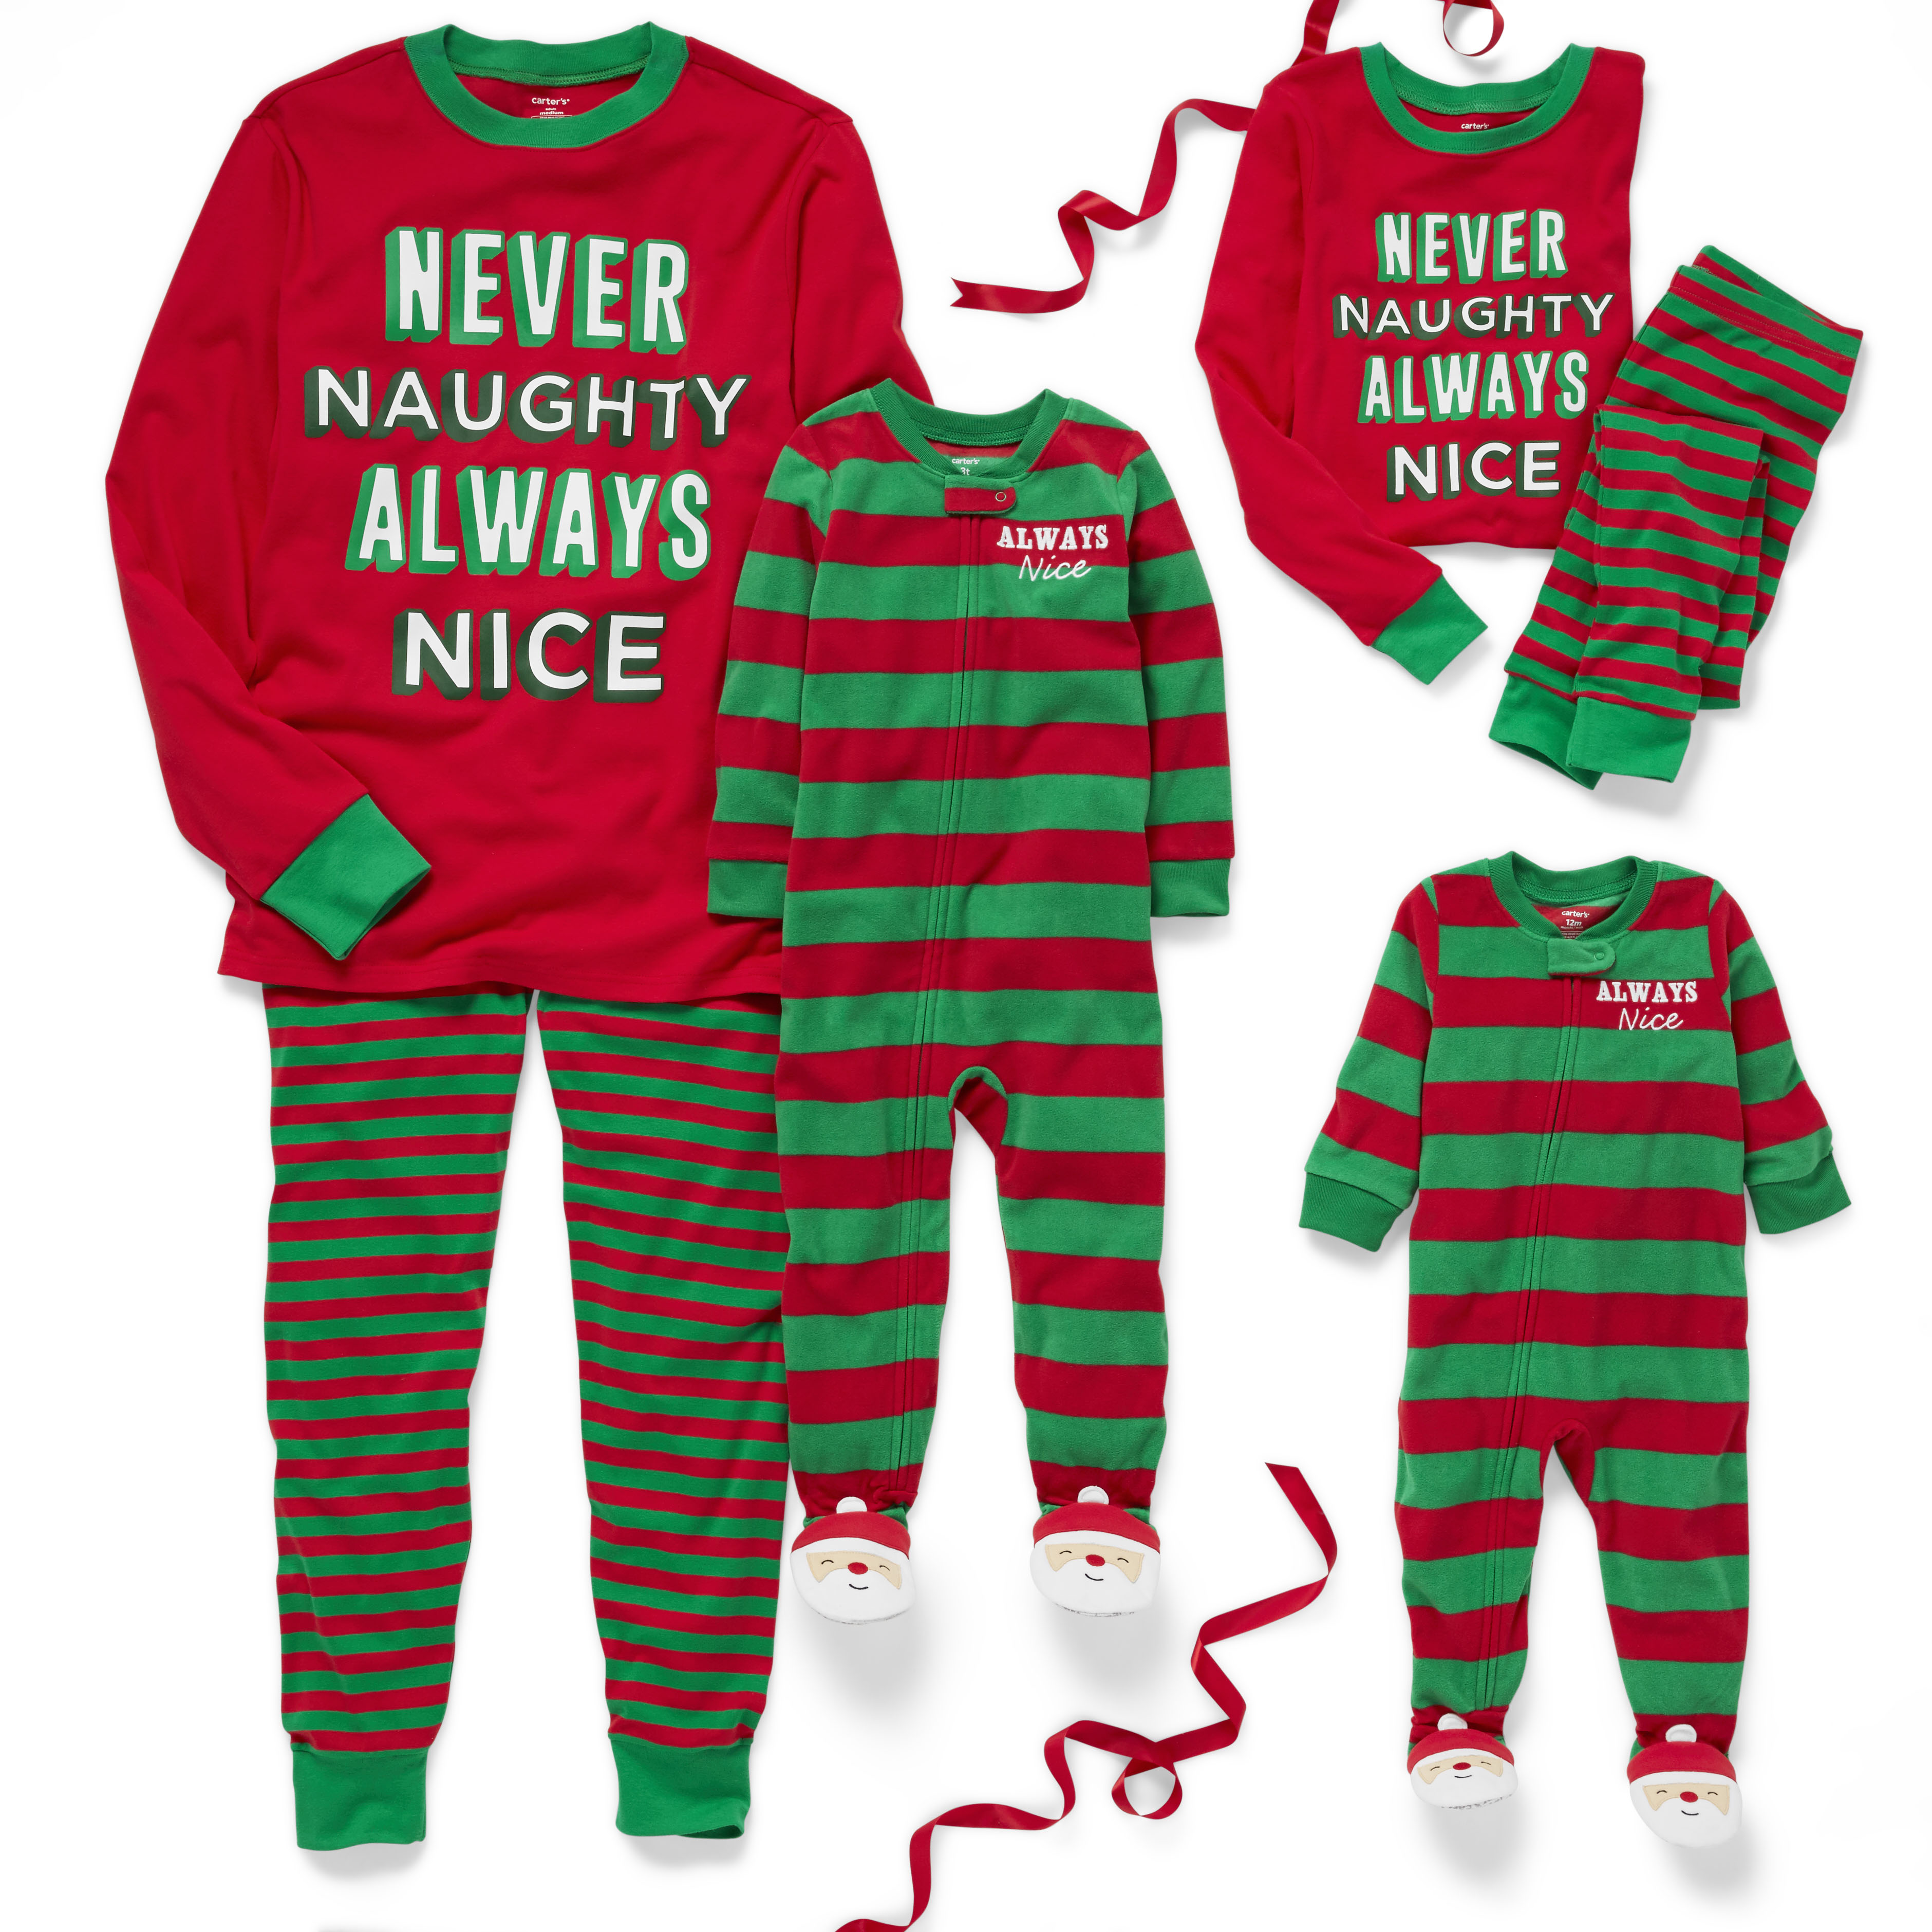 These Carter S Matching Family Holiday Pajamas Are Too Flippin Cute